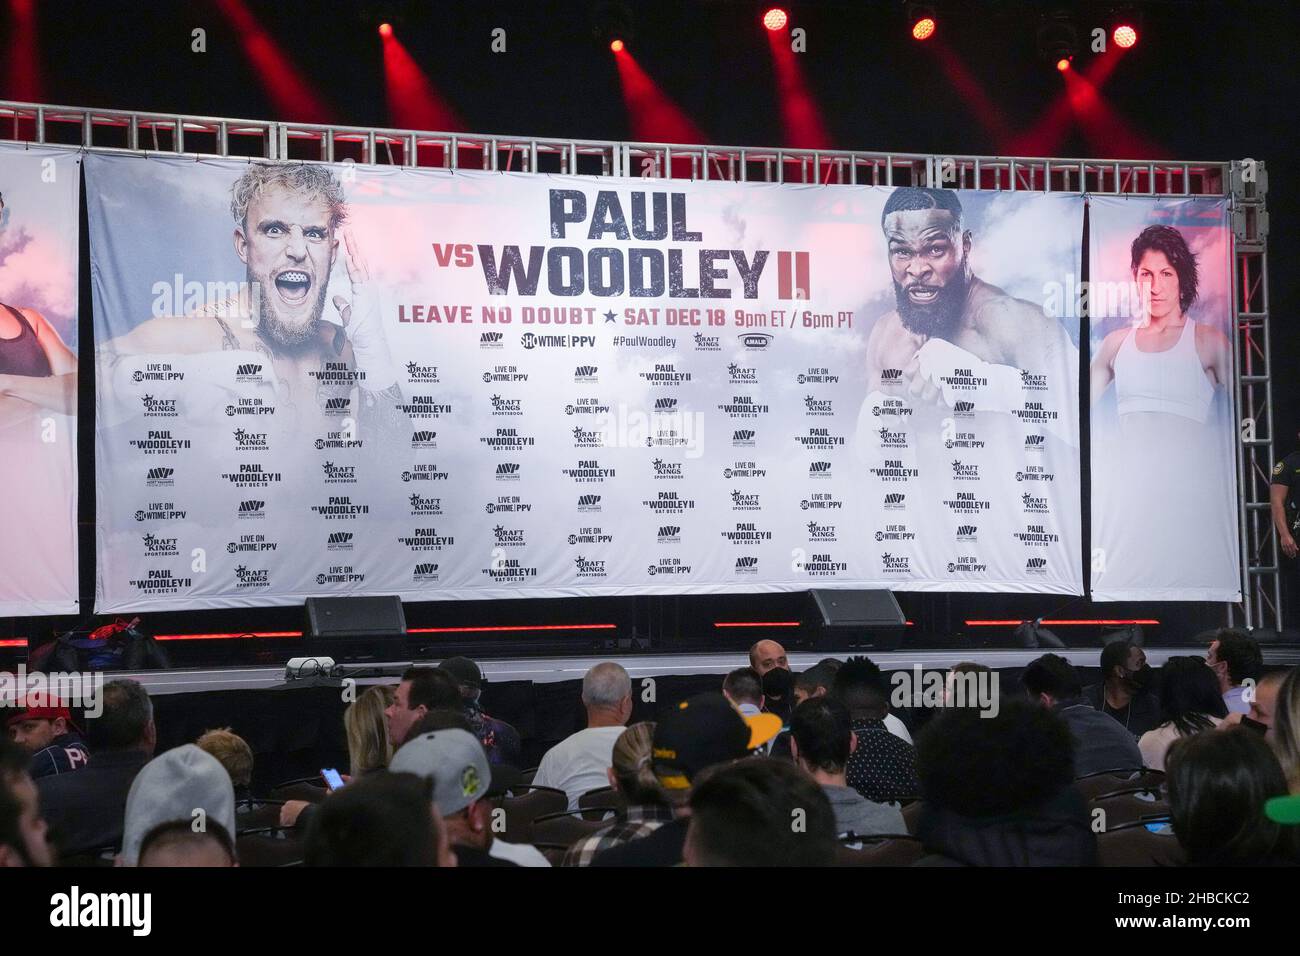 Tampa, Florida, USA. 17th Dec 2021. TAMPA, FL - DECEMBER 17:  Miscellaneous shots from Seminole Hard Rock Tampa for Jake Paul vs. Tyron Woodley 2 - Media Week on December 17, 2021 in Tampa, Florida, United States. (Photo by Louis Grasse/PxImages) Credit: Px Images/Alamy Live News Stock Photo